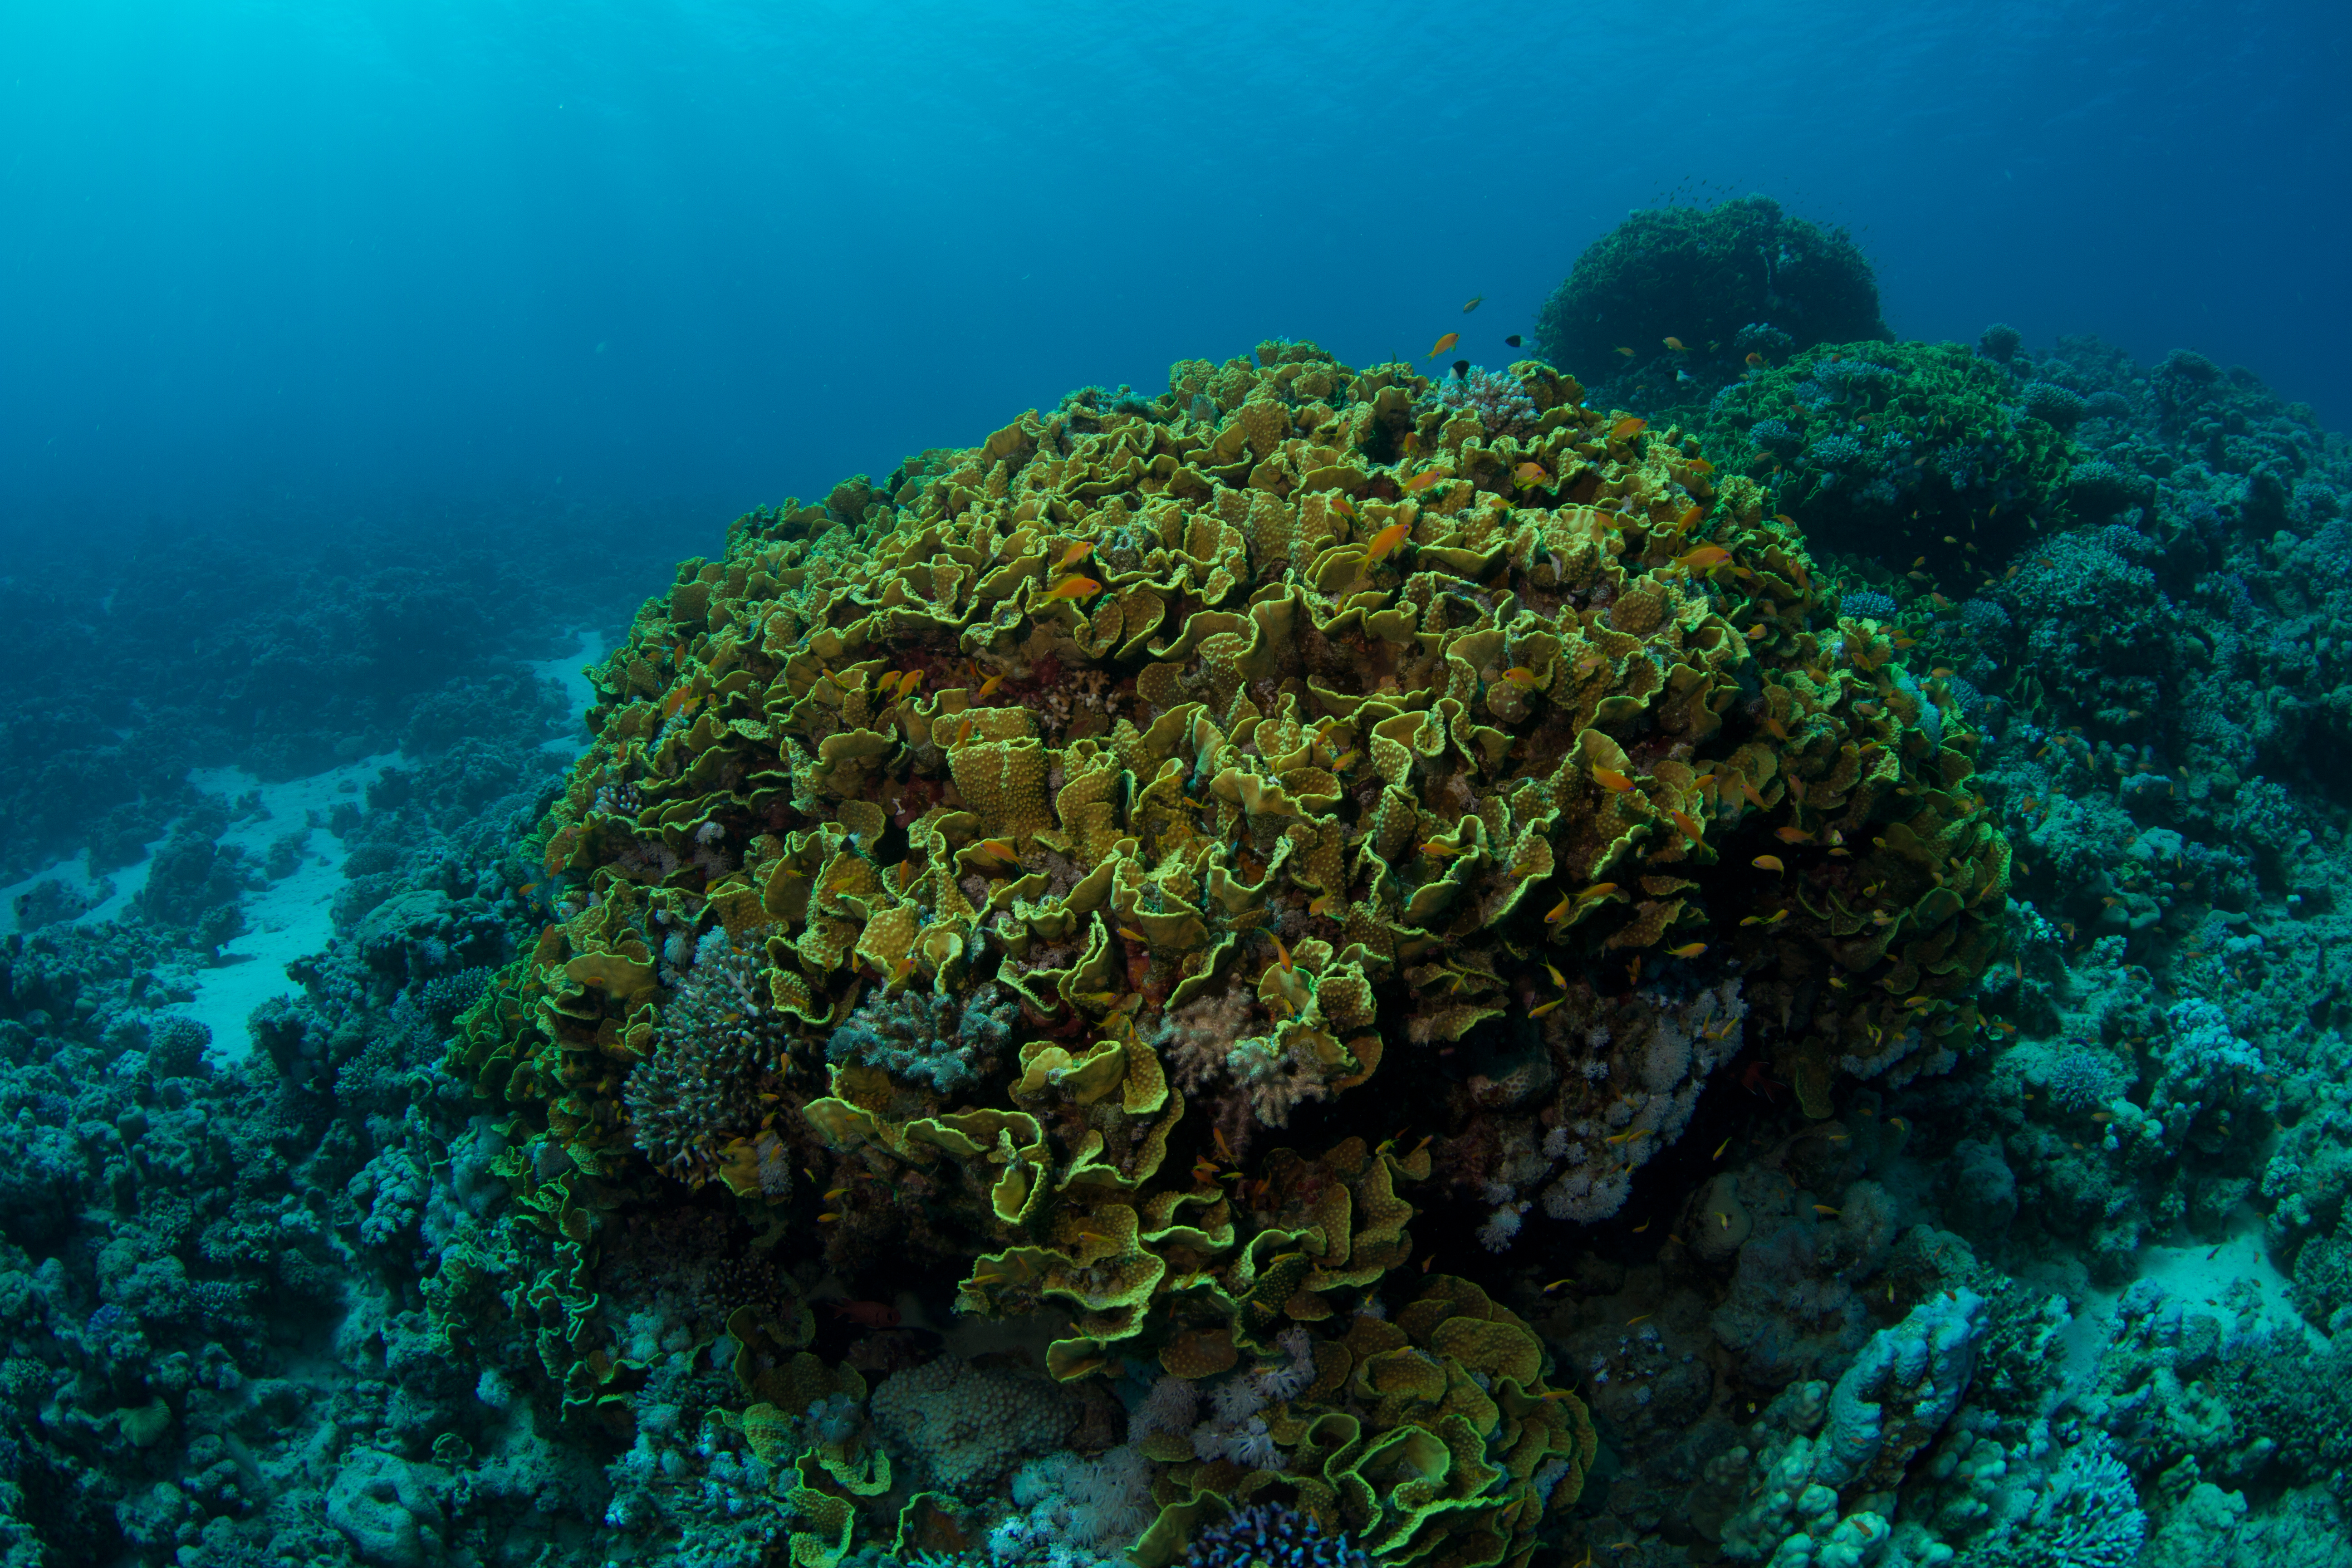 Huge cabbage coral formations blend in along with other coral encrusted surfaces that provide nourishment to the marine life that call the Coral Gardens dive site in Savai&#039;I, Samoa home